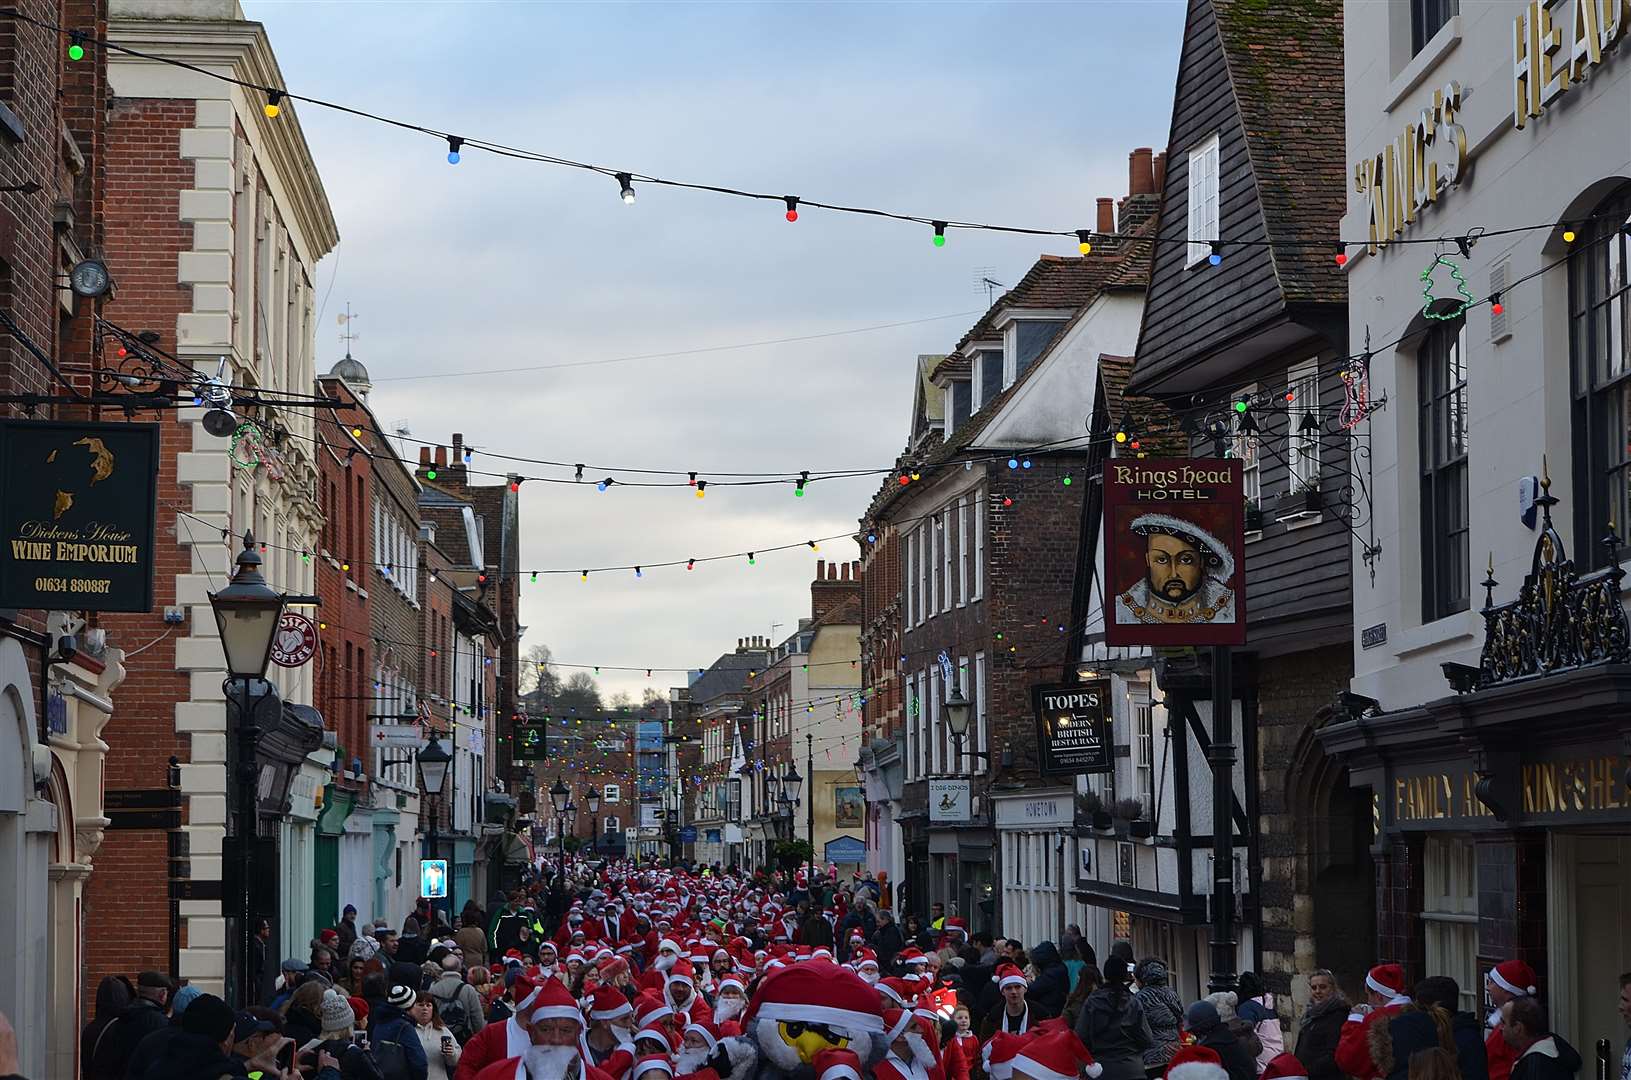 People clad in red and white make their way down Rochester's High Street during the mammoth Santa run [credit: Jason Arthur]